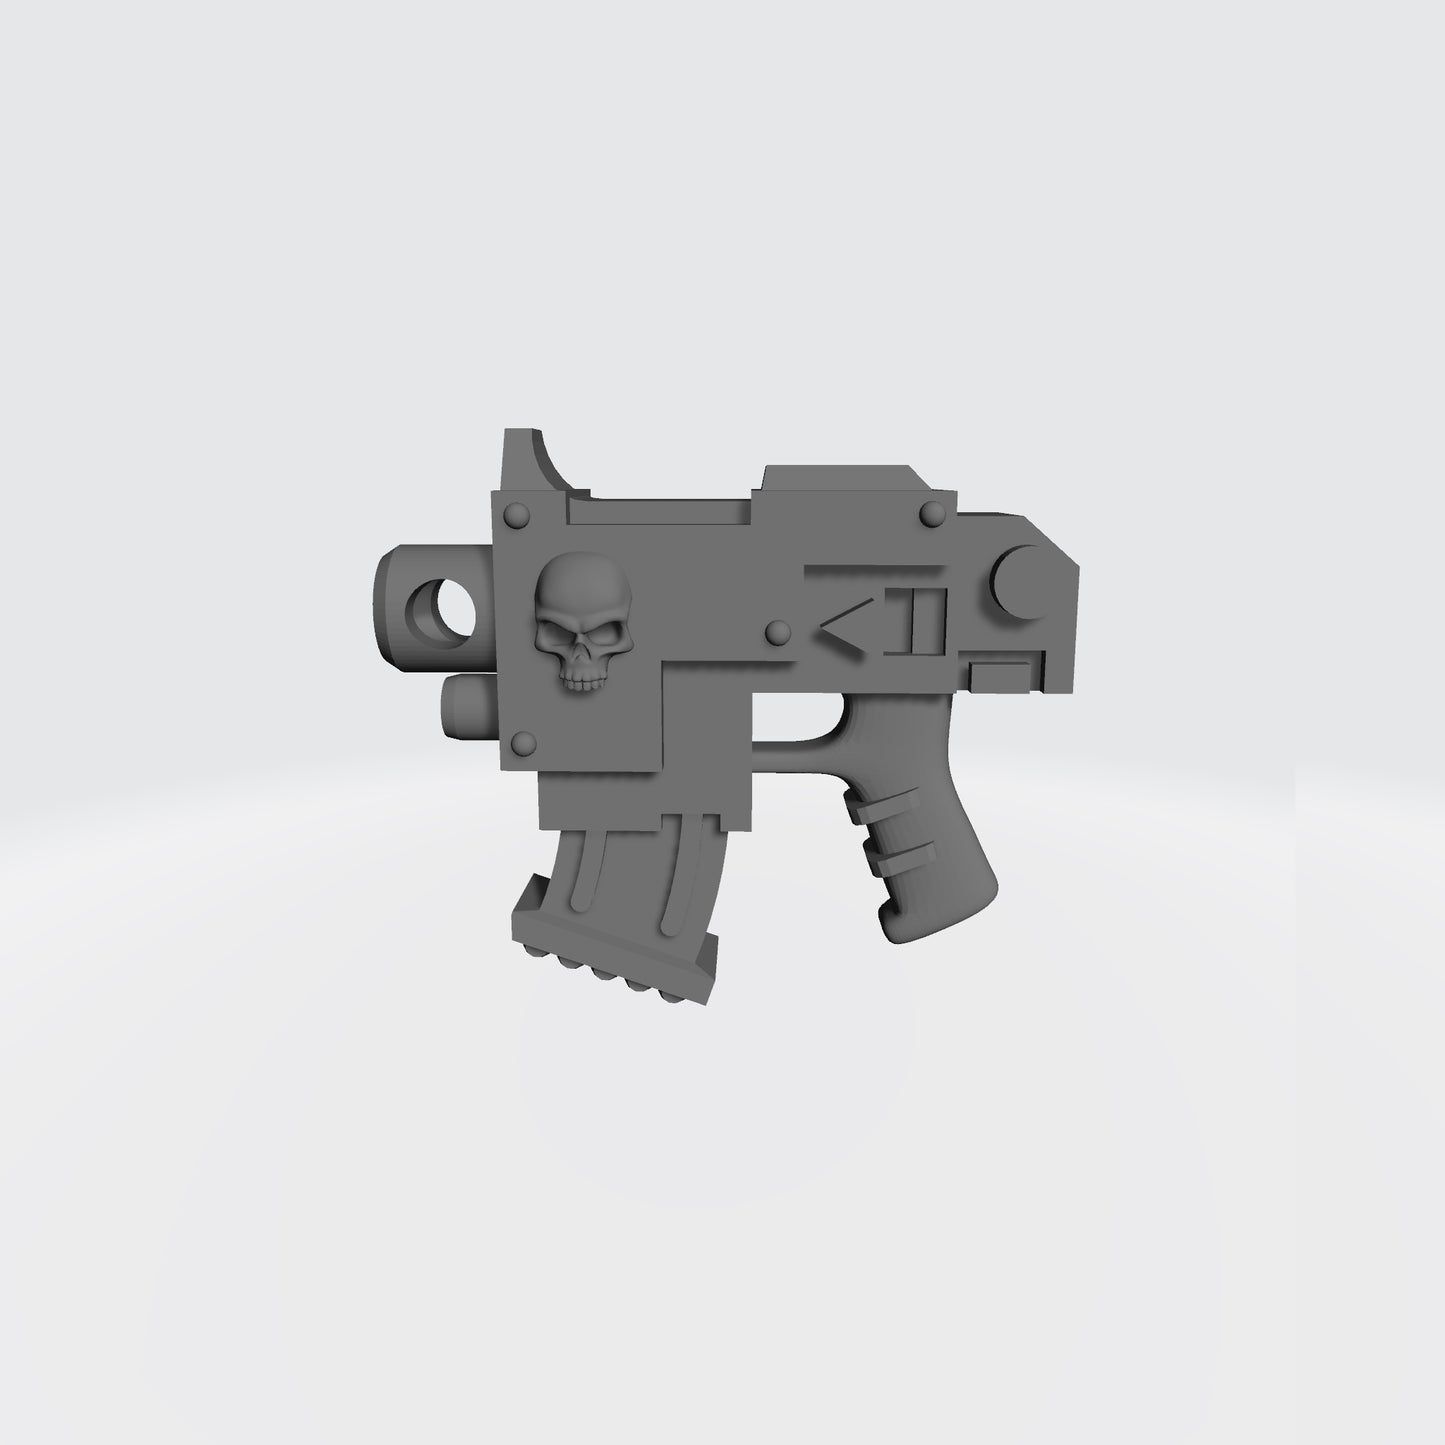 Left Side of the Sisters of Battle Bolt Pistol with Fleur-de-lis Compatible with McFarlane Toys 3D file designed by Fantasy World Games